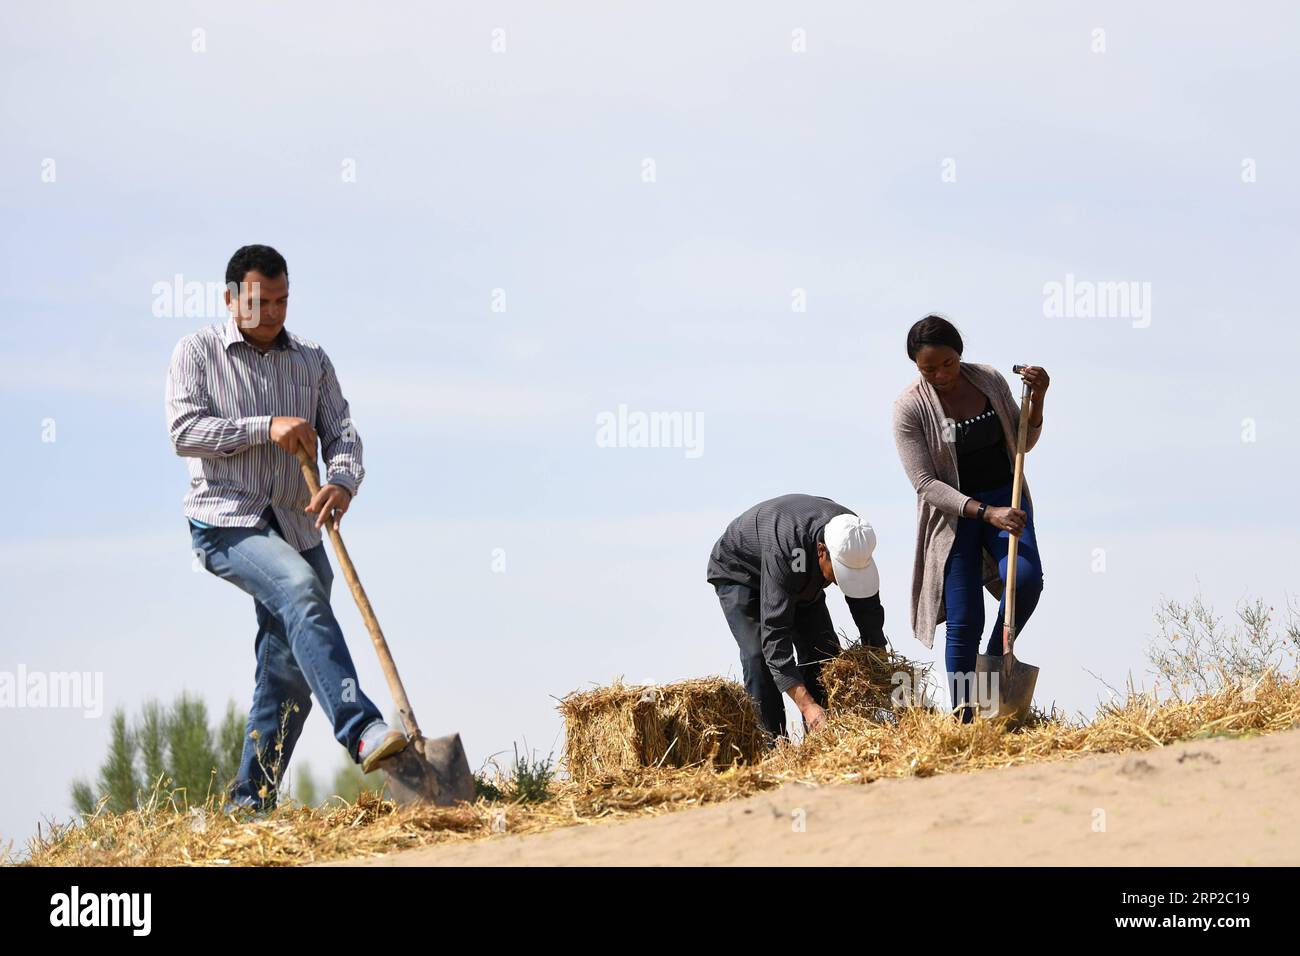 (180829) -- LANZHOU, Aug. 29, 2018 -- Nakanyala Elina Shekupe (1st R) learns desert control in Minqin County, northwest China s Gansu Province, Aug. 26, 2018. Shekupe, 37, is an agricultural technology official from Namibia. She and 11 other students are taking part in a desertification combating and ecological restoration training course organized by China s Ministry of Commerce in Gansu. I hope more and more African friends will come to China to learn new technology on desert control and benefit people in their hometown, she said. )(mcg) CHINA-GANSU-DESERTIFICATION COMBAT-AFRICAN STUDENT (CN Stock Photo